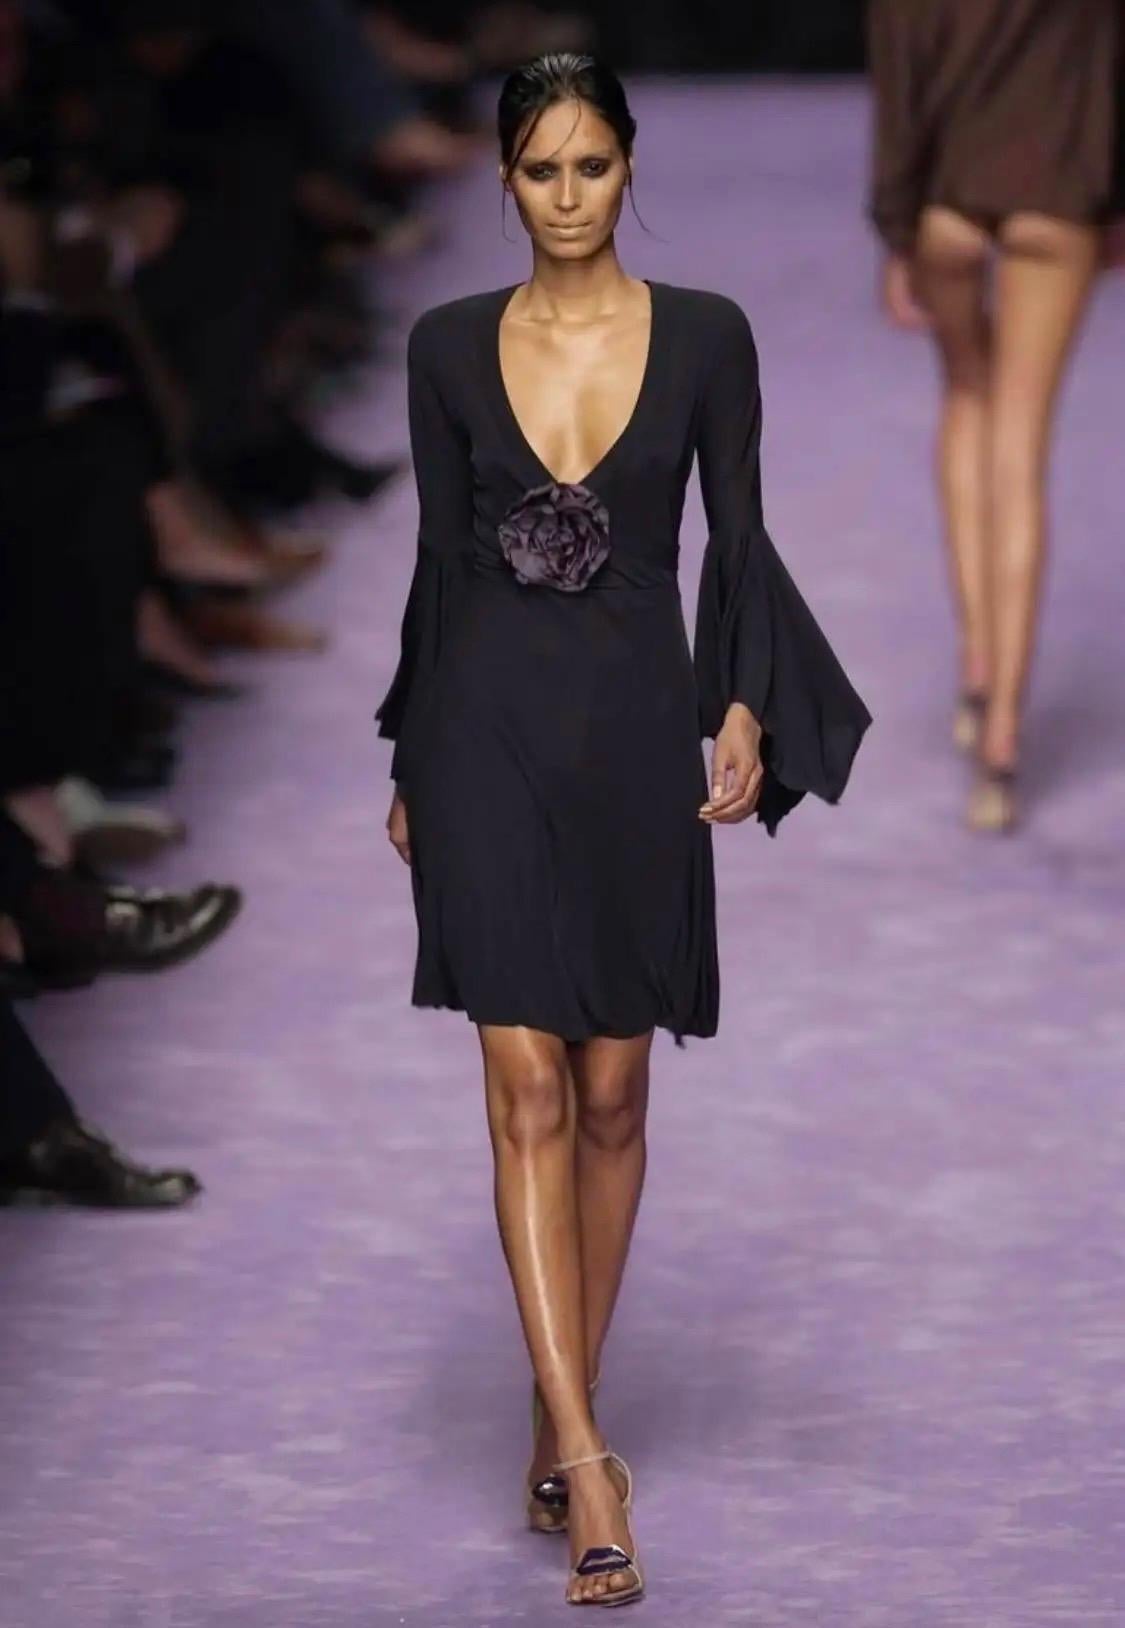 Presenting a lavender stretch top designed by Tom Ford for Yves Saint Laurent Rive Gauche's Spring/Summer 2003 collection. The bell sleeves and floral brooch elements were heavily featured on the season's runway, including a black dress version of